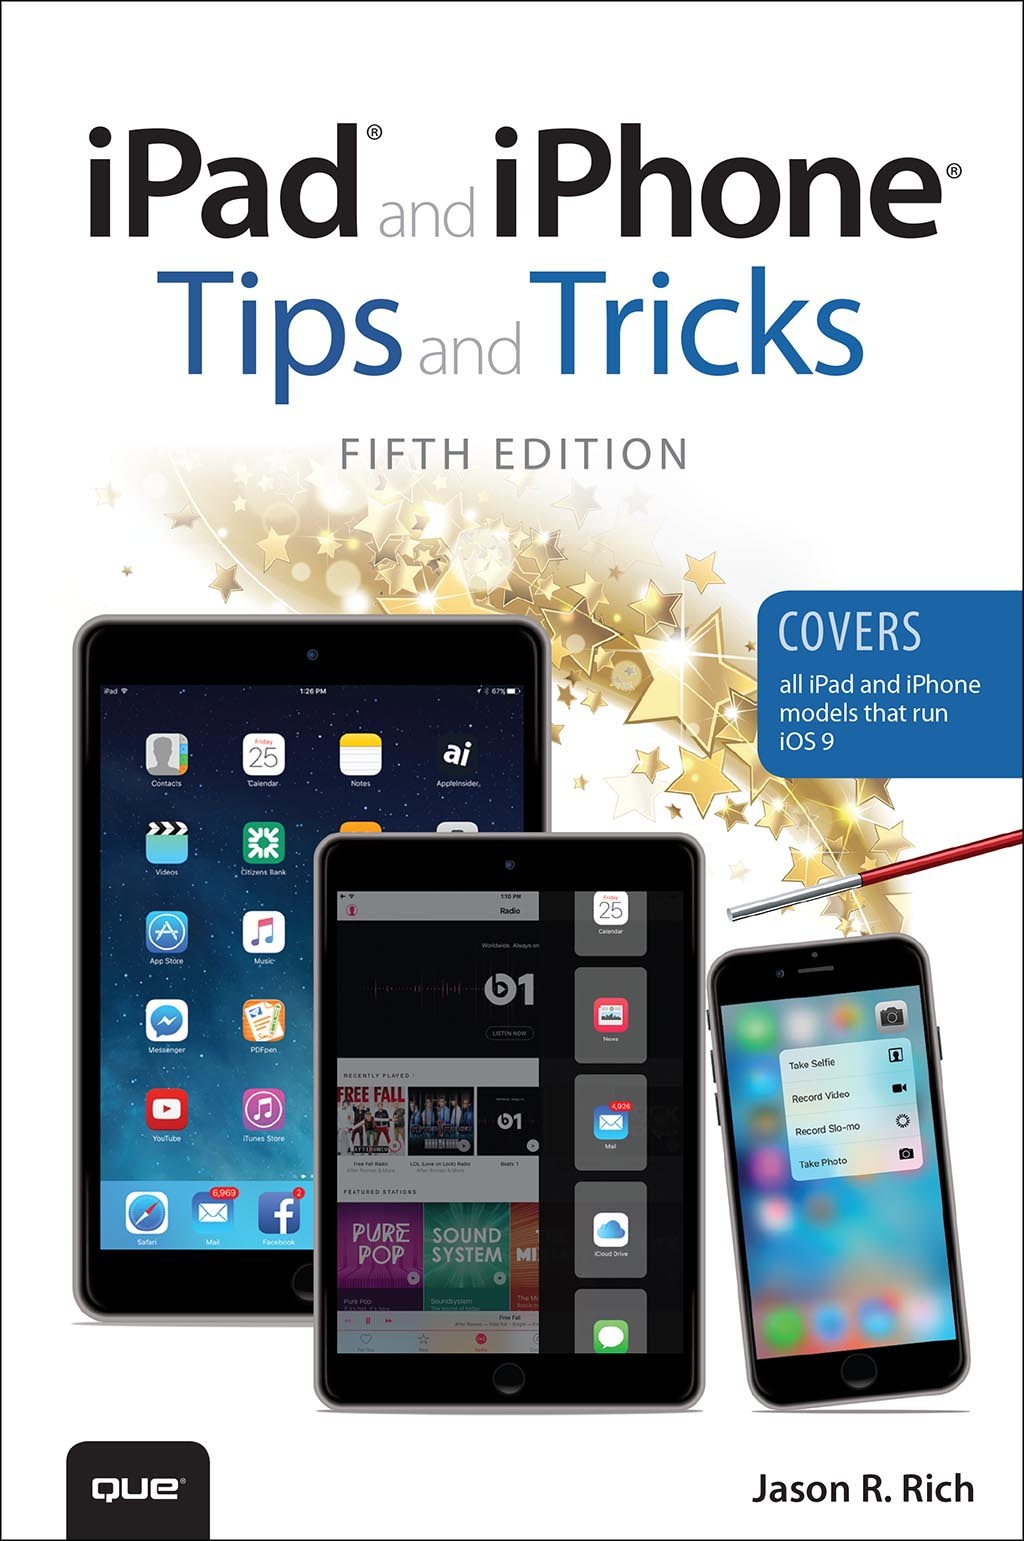 iPad and iPhone Tips and Tricks (Covers iPads and iPhones running iOS9), 5th Edition